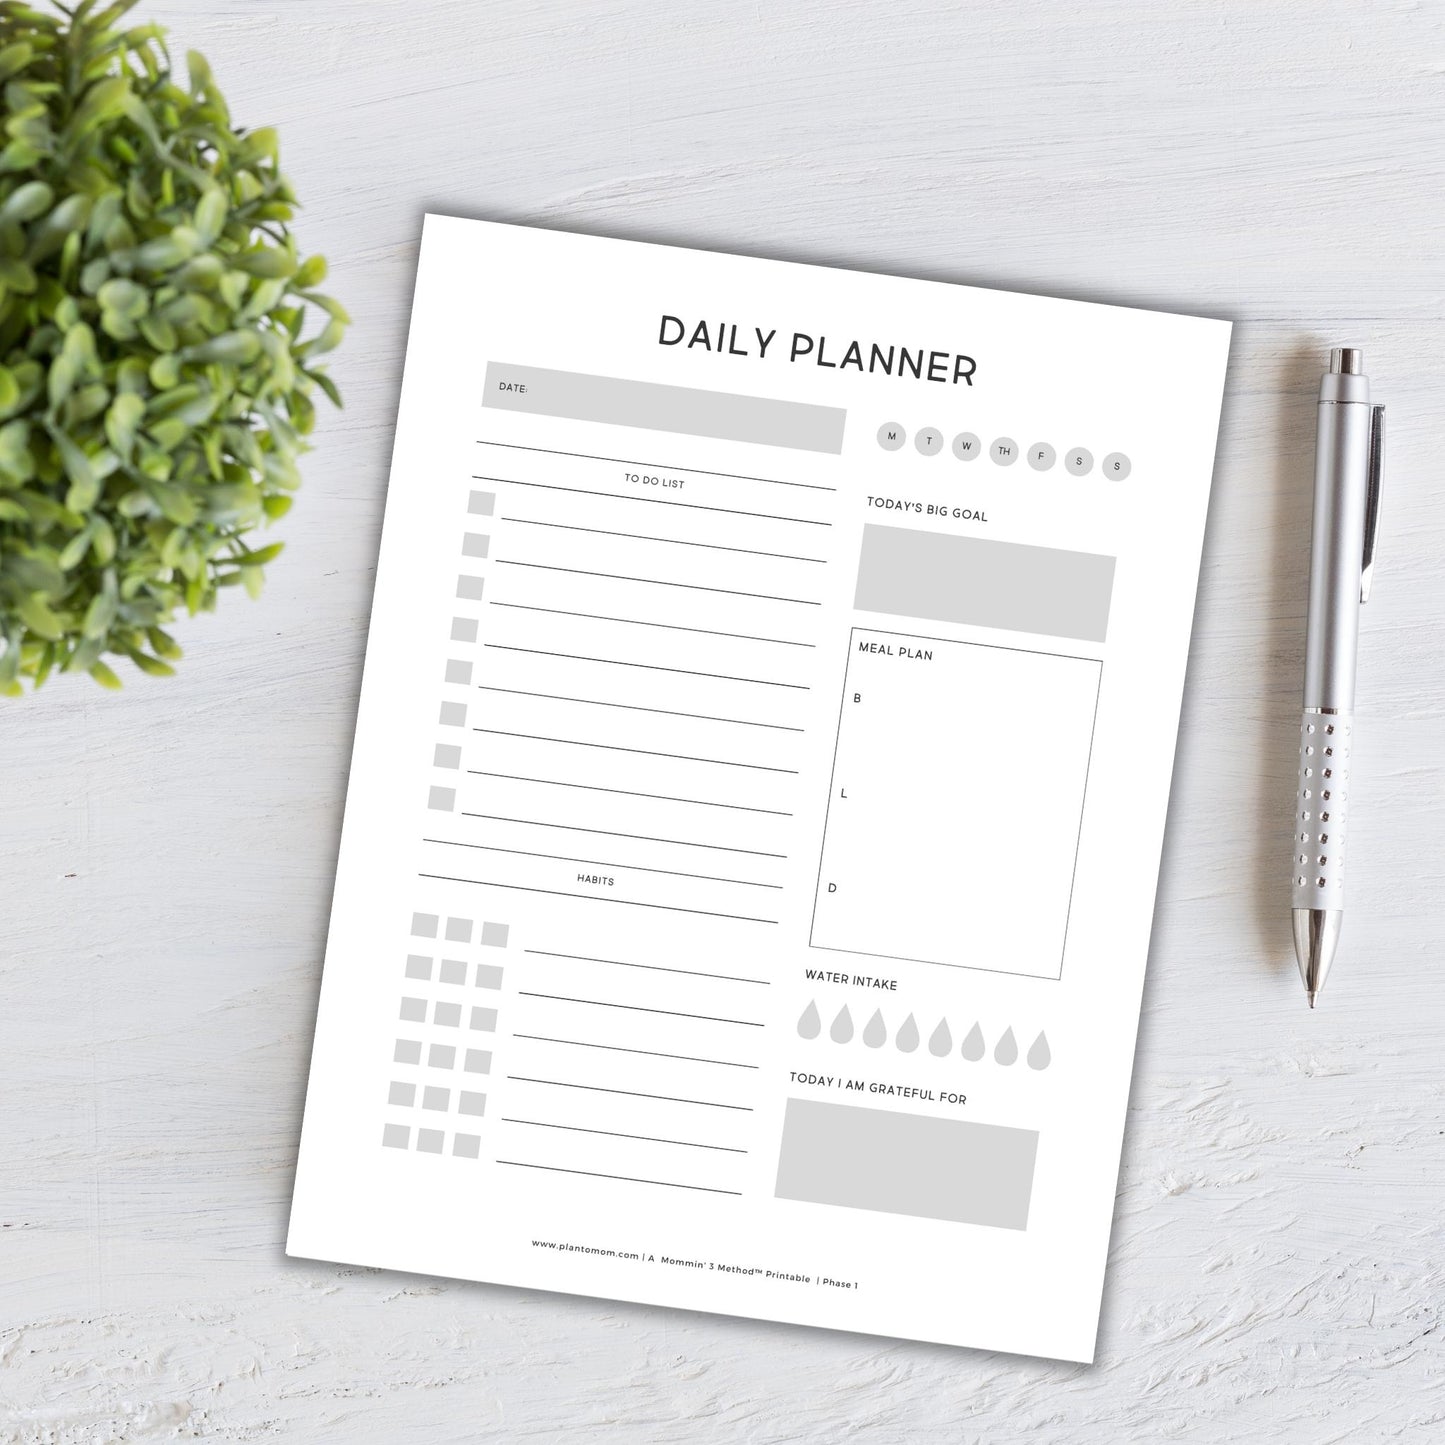 Printable Daily Planner Bundle of 5 - US LETTER COLOR - 'Daily Planner with meal planner + habits' Layout